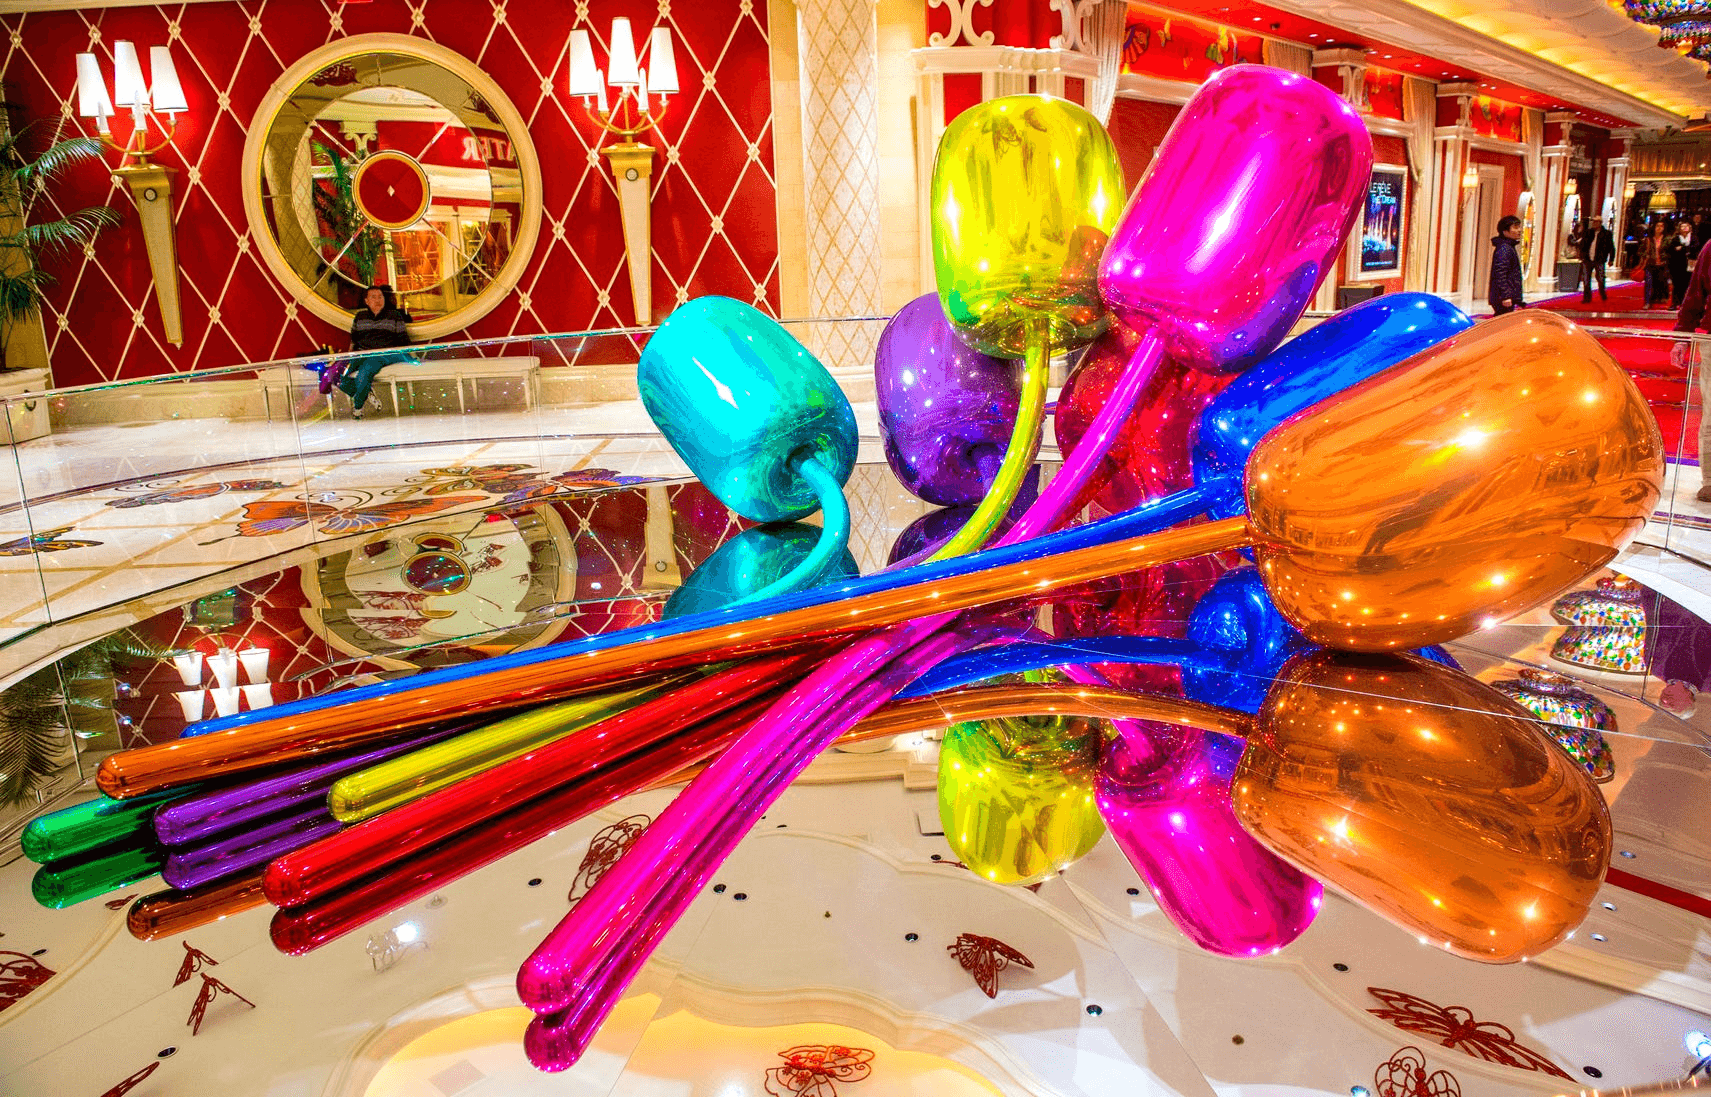 Jeff Koons: Blowing Up like his Famous Balloons